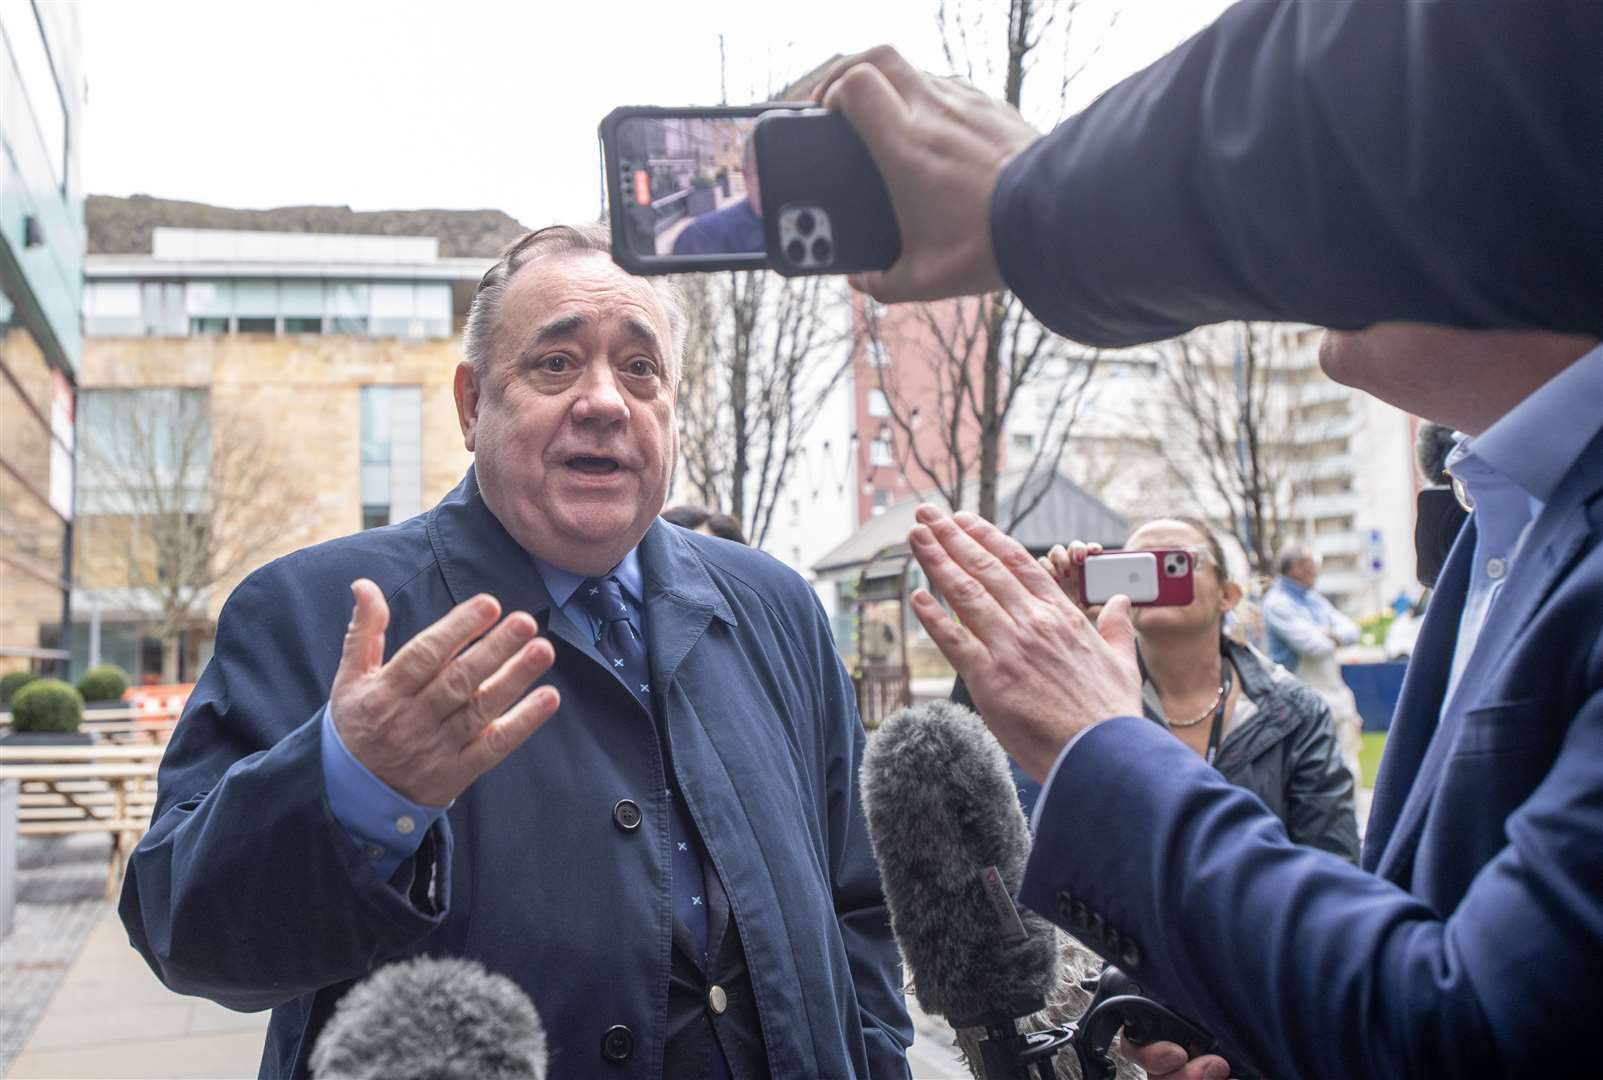 Alex Salmond has said he will attend a pro-independence rally on the day of the King’s coronation (PA)